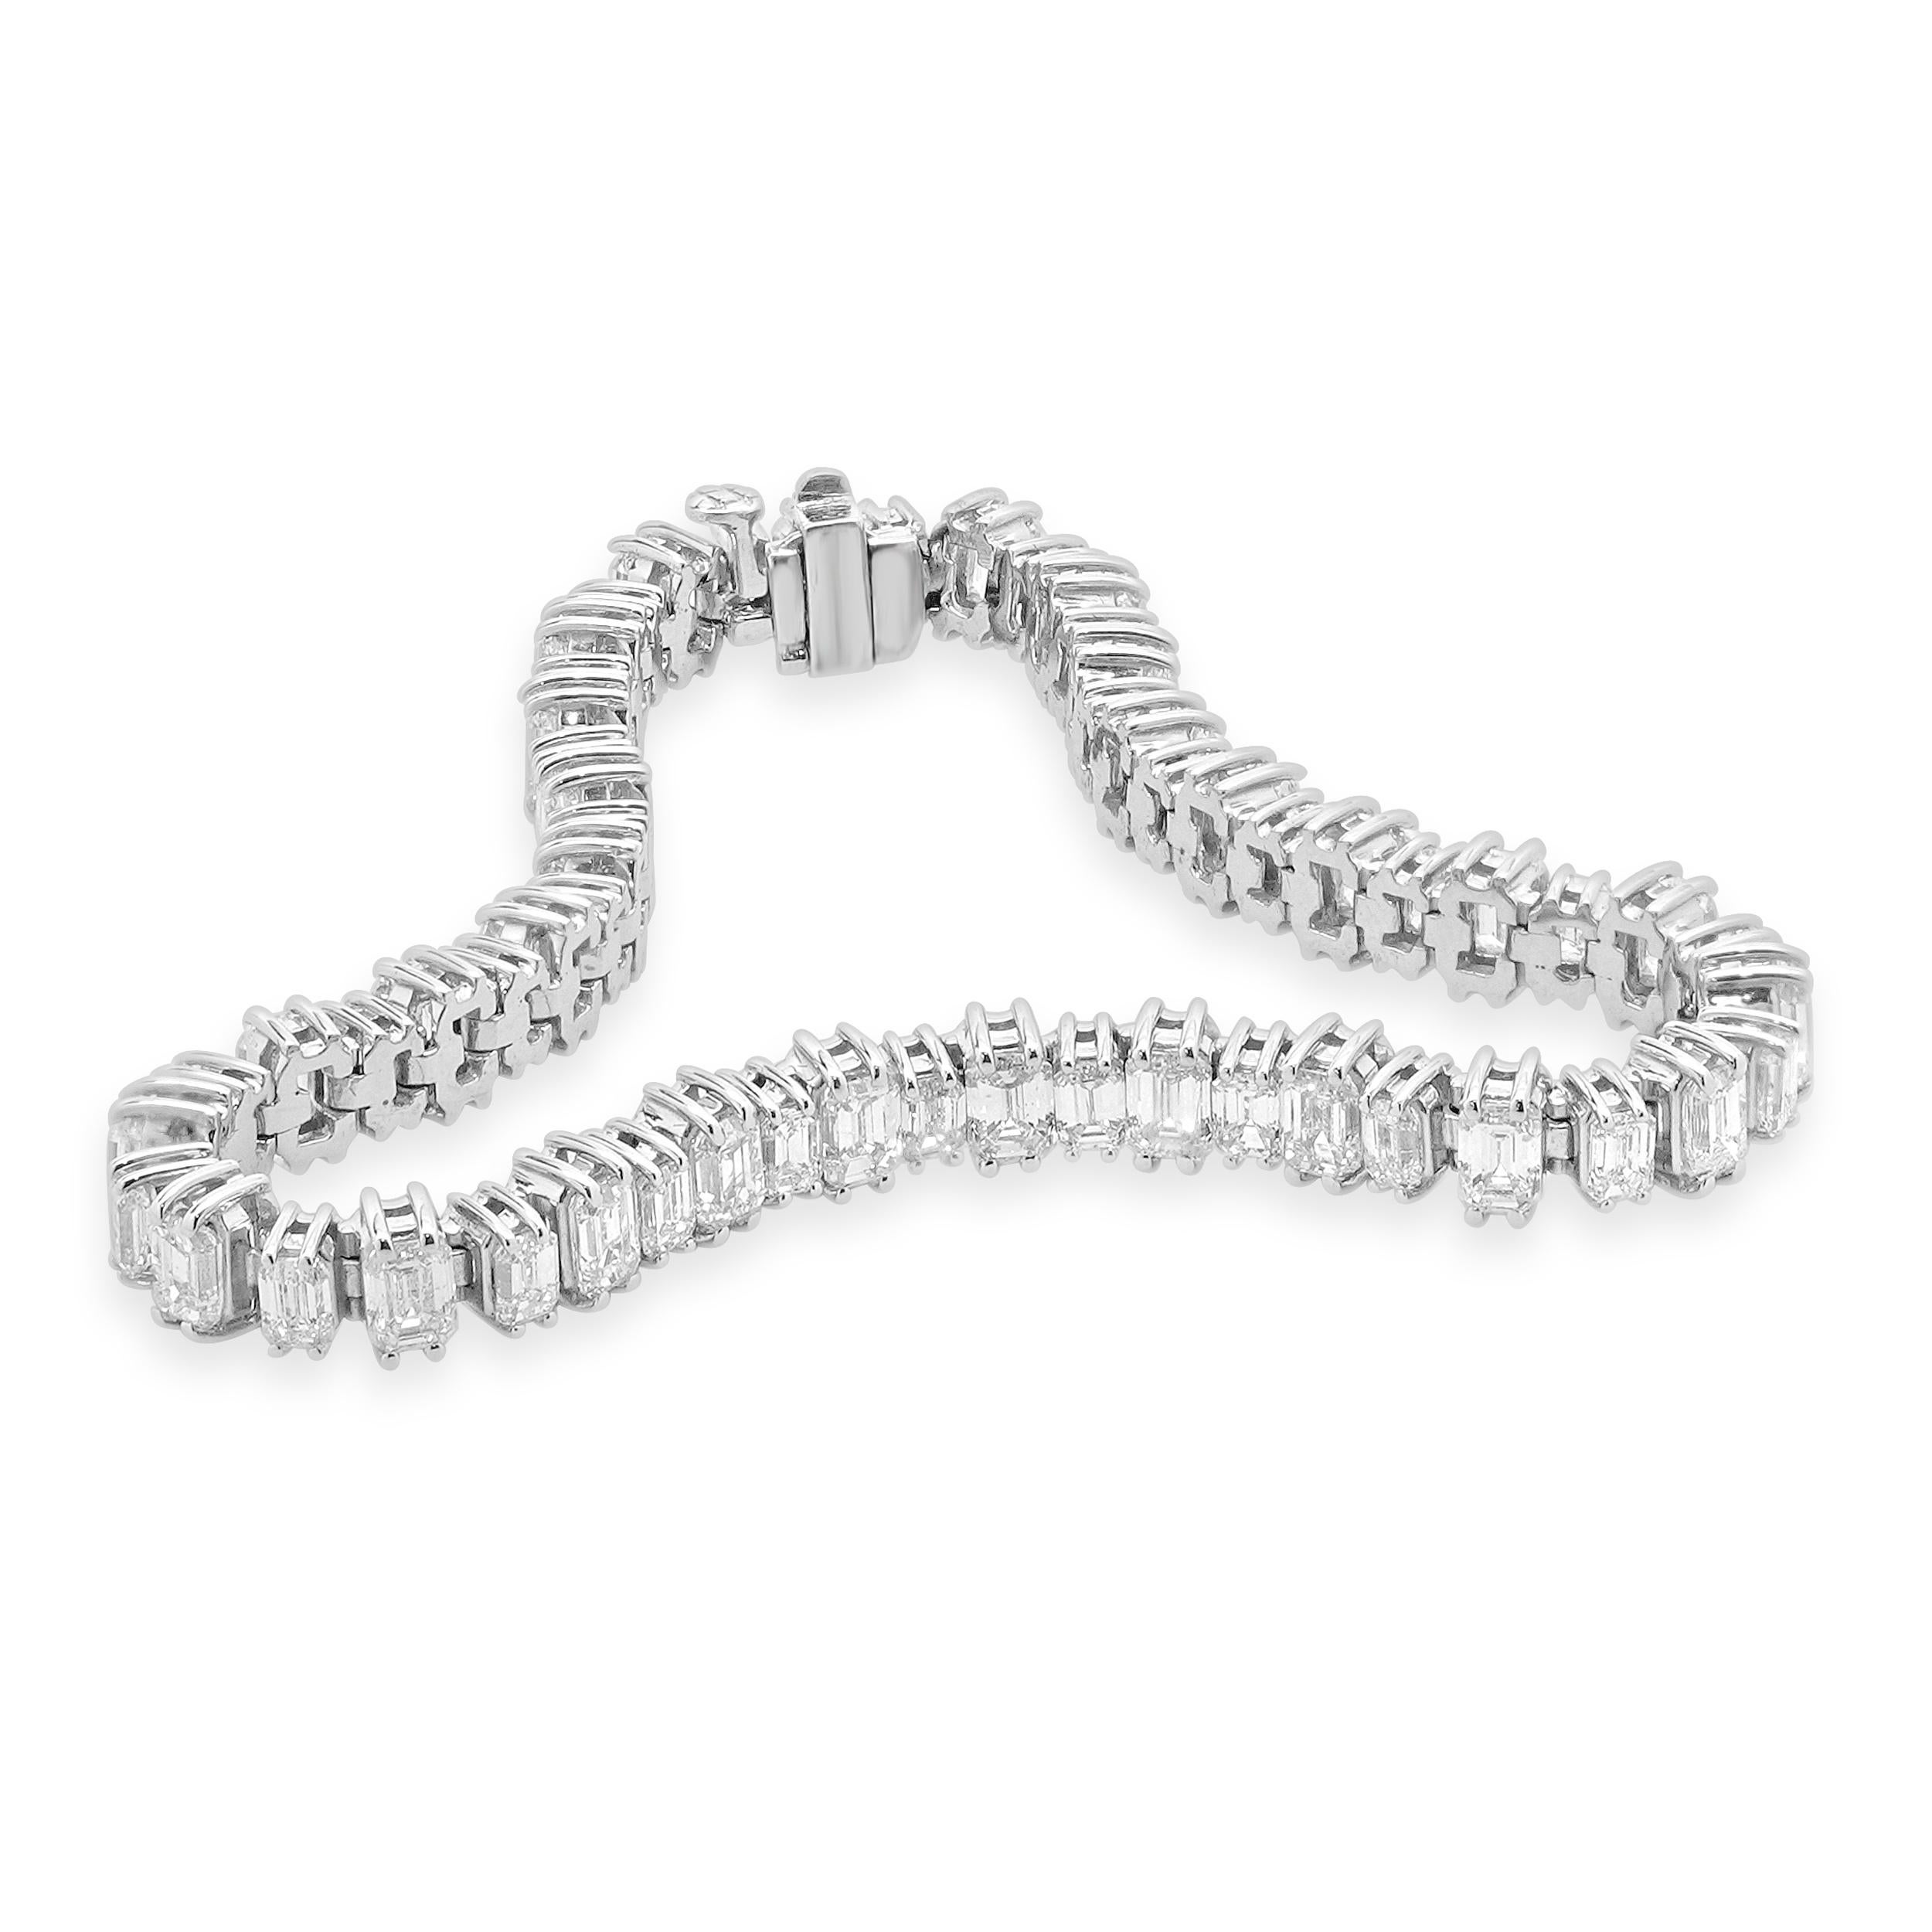 Designer: custom design
Material: 14K white Gold
Diamond: 58 emerald cut= 10.87cttw
Color: G
Clarity: VS-SI1
Dimensions: bracelet will fit up to a 7-inch wrist
Weight: 17.65 grams
